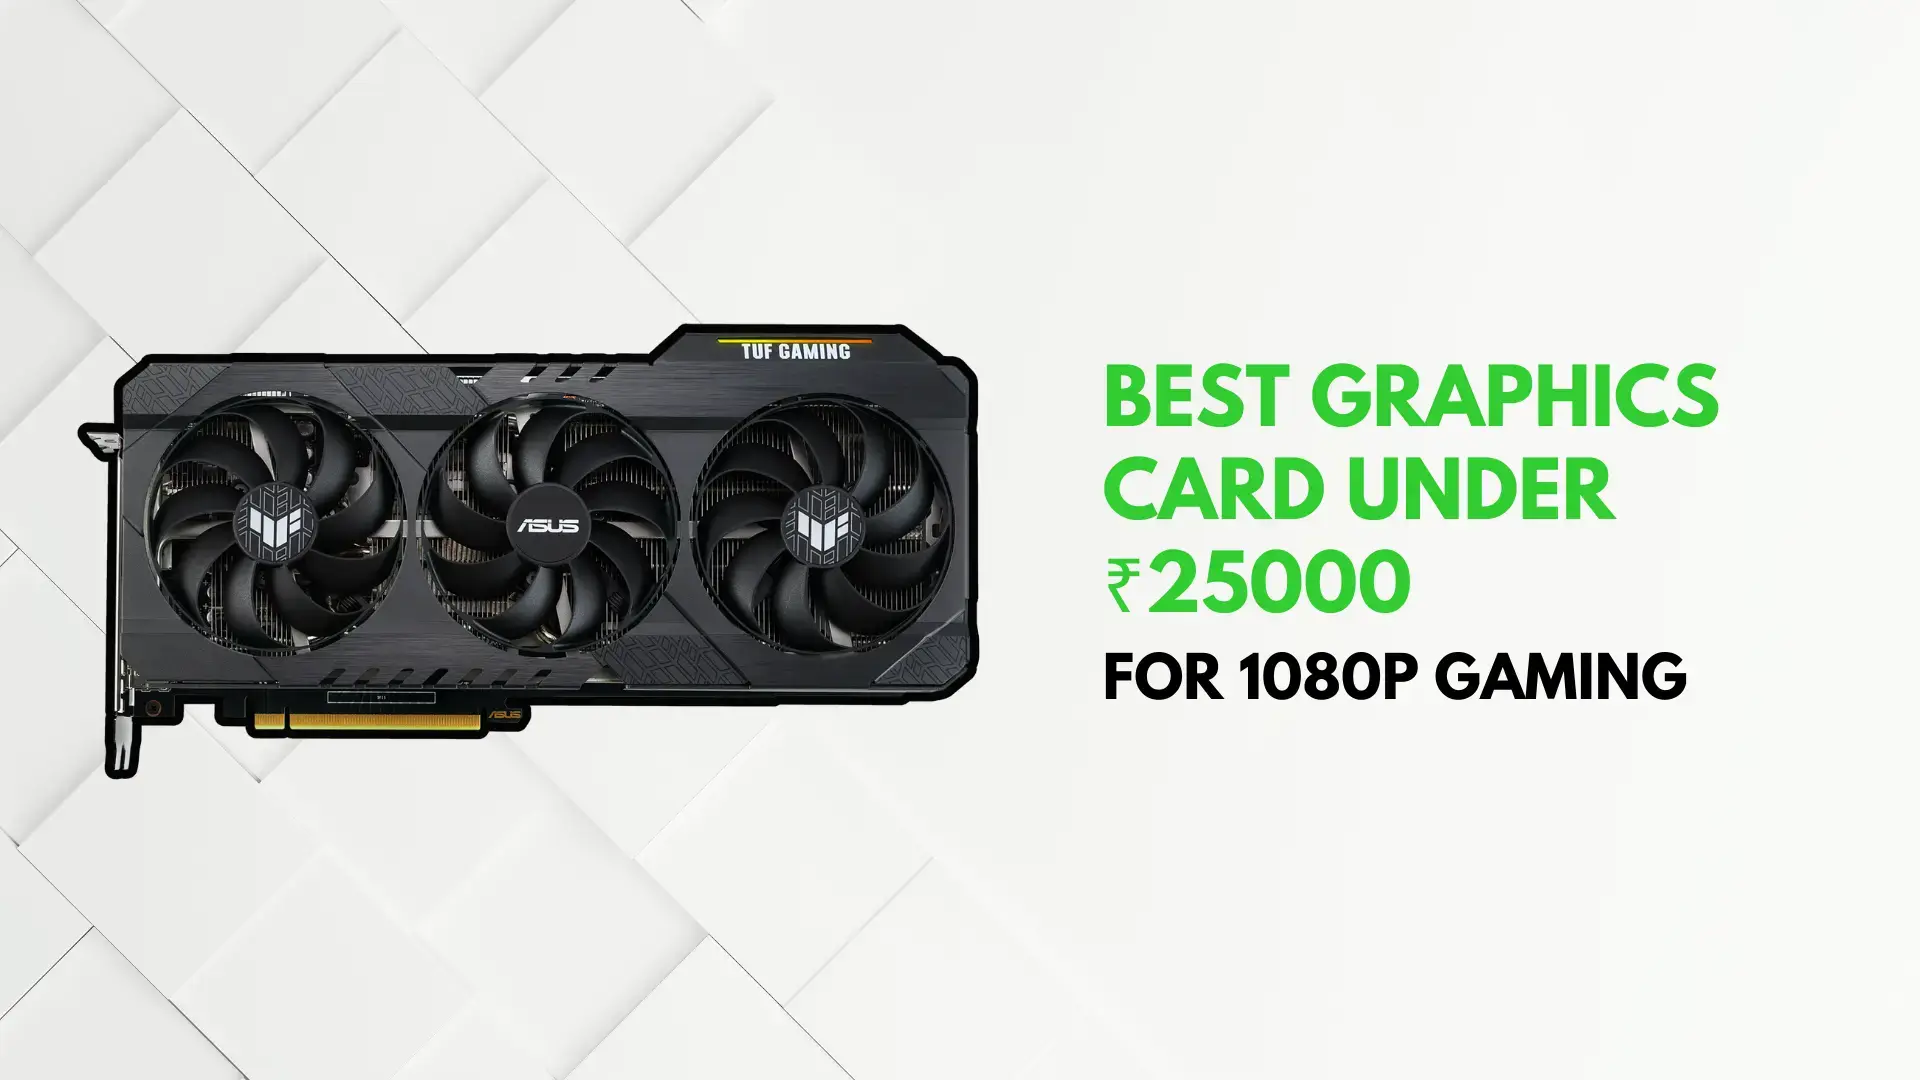 Best Graphics Card to buy Under ₹25000 for 1080p gaming